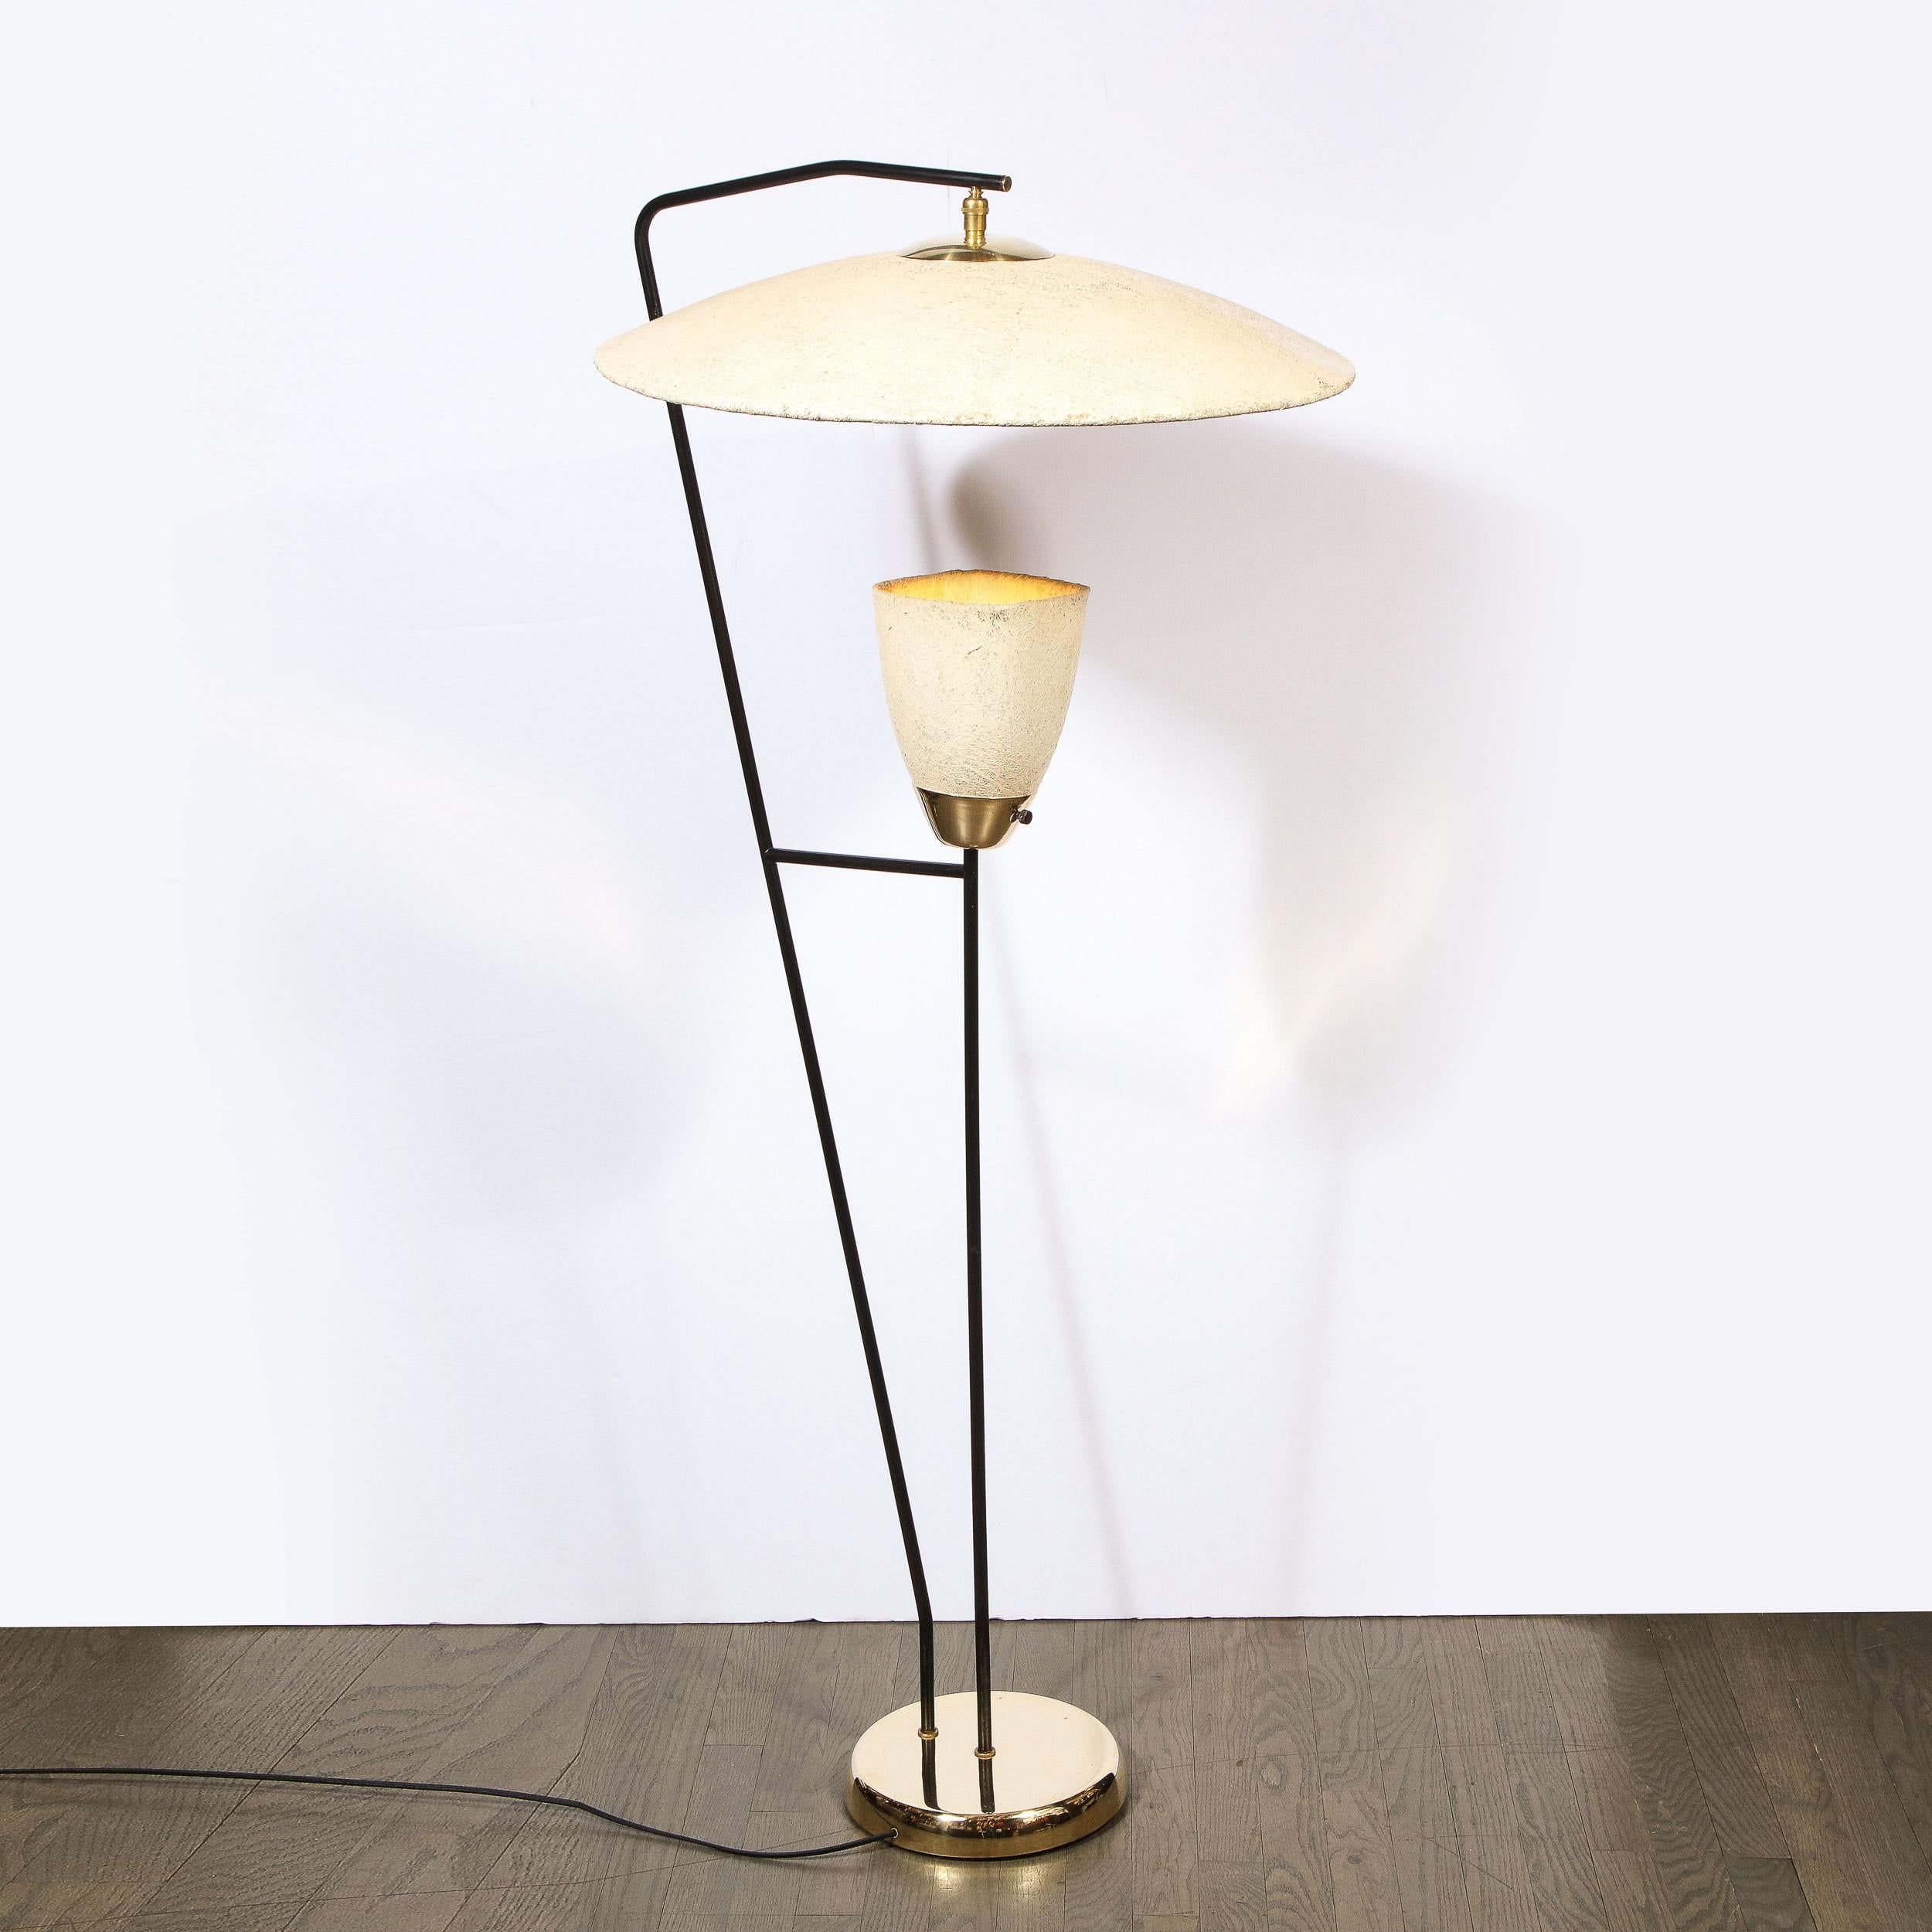 This sophisticated Mid-Century Modern floor lamp was realized in the United States circa 1950. It features a circular button-like base in polished brass from which two cylindrical supports in black enamel ascend. One of the supports rises from the